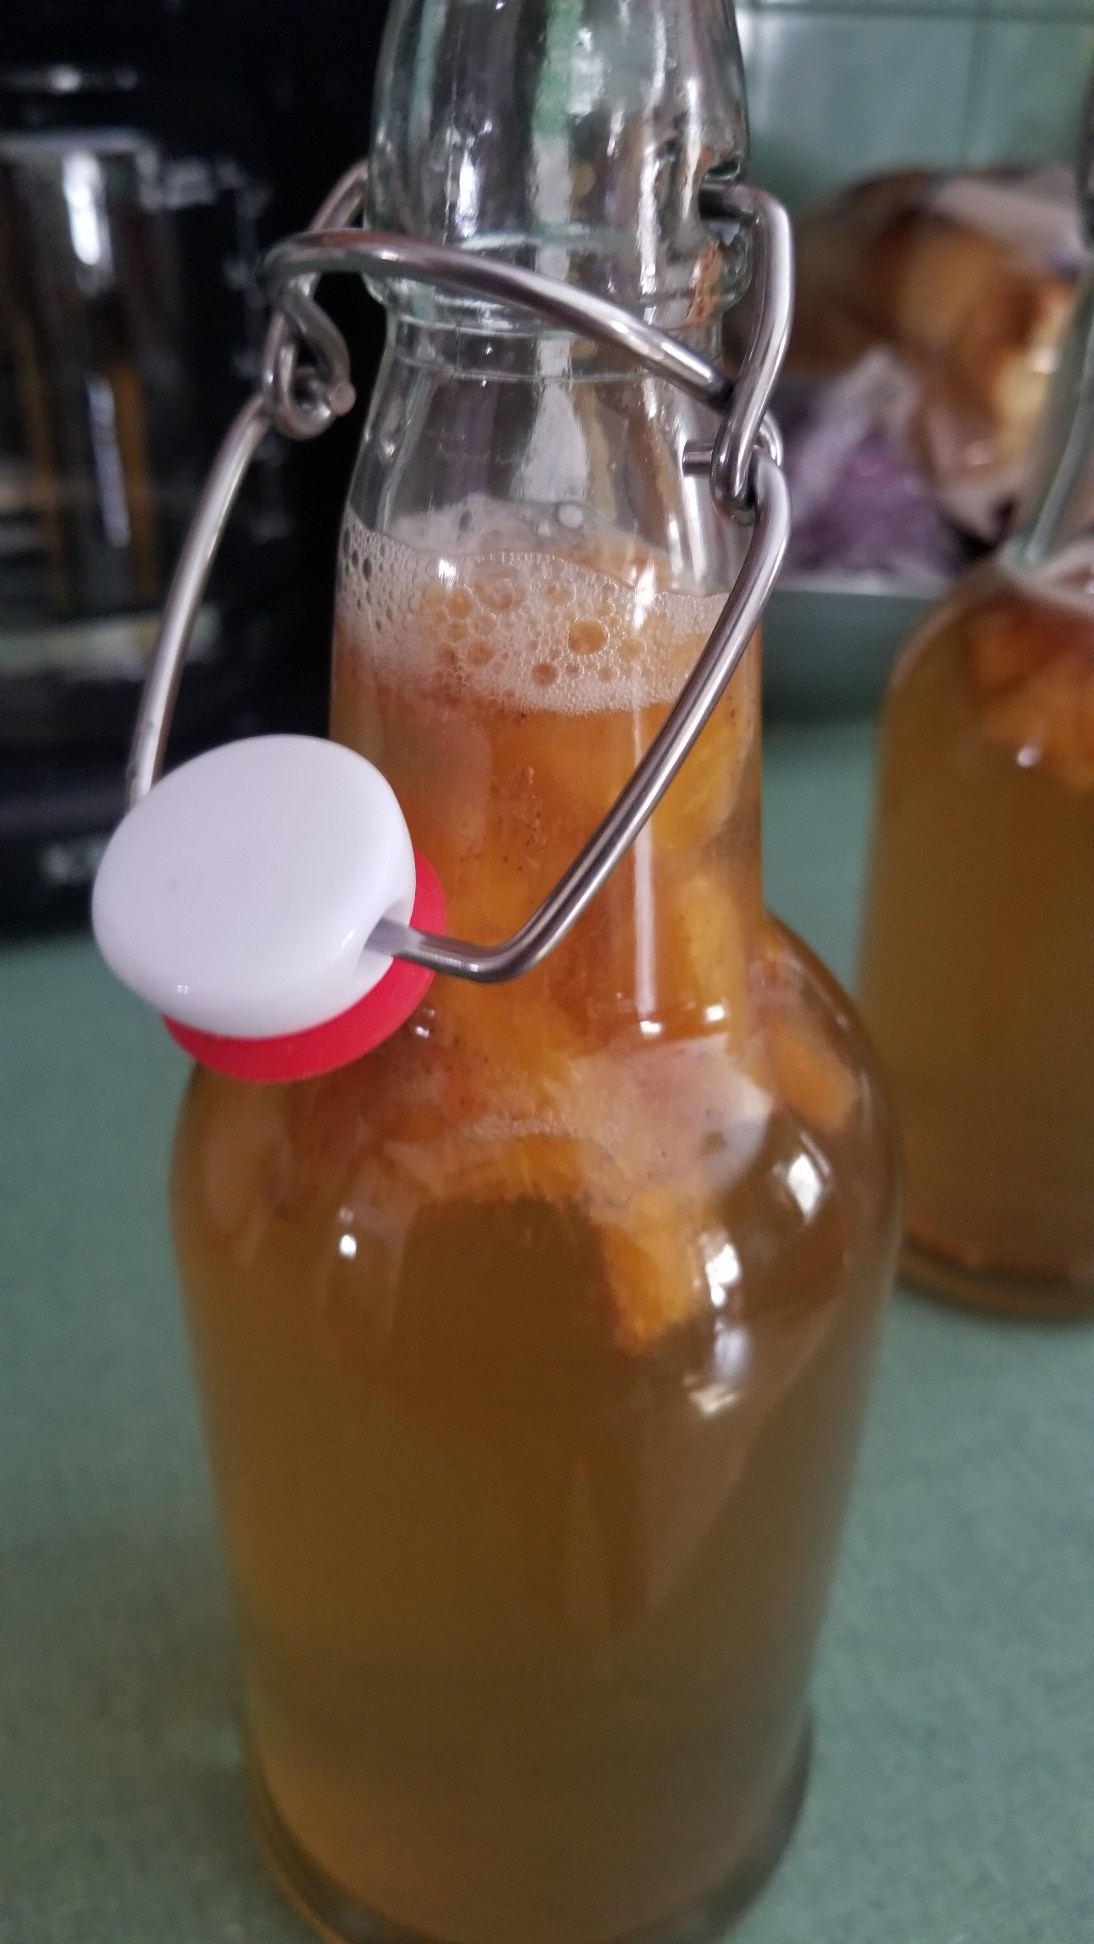 Day 14 Carbonation